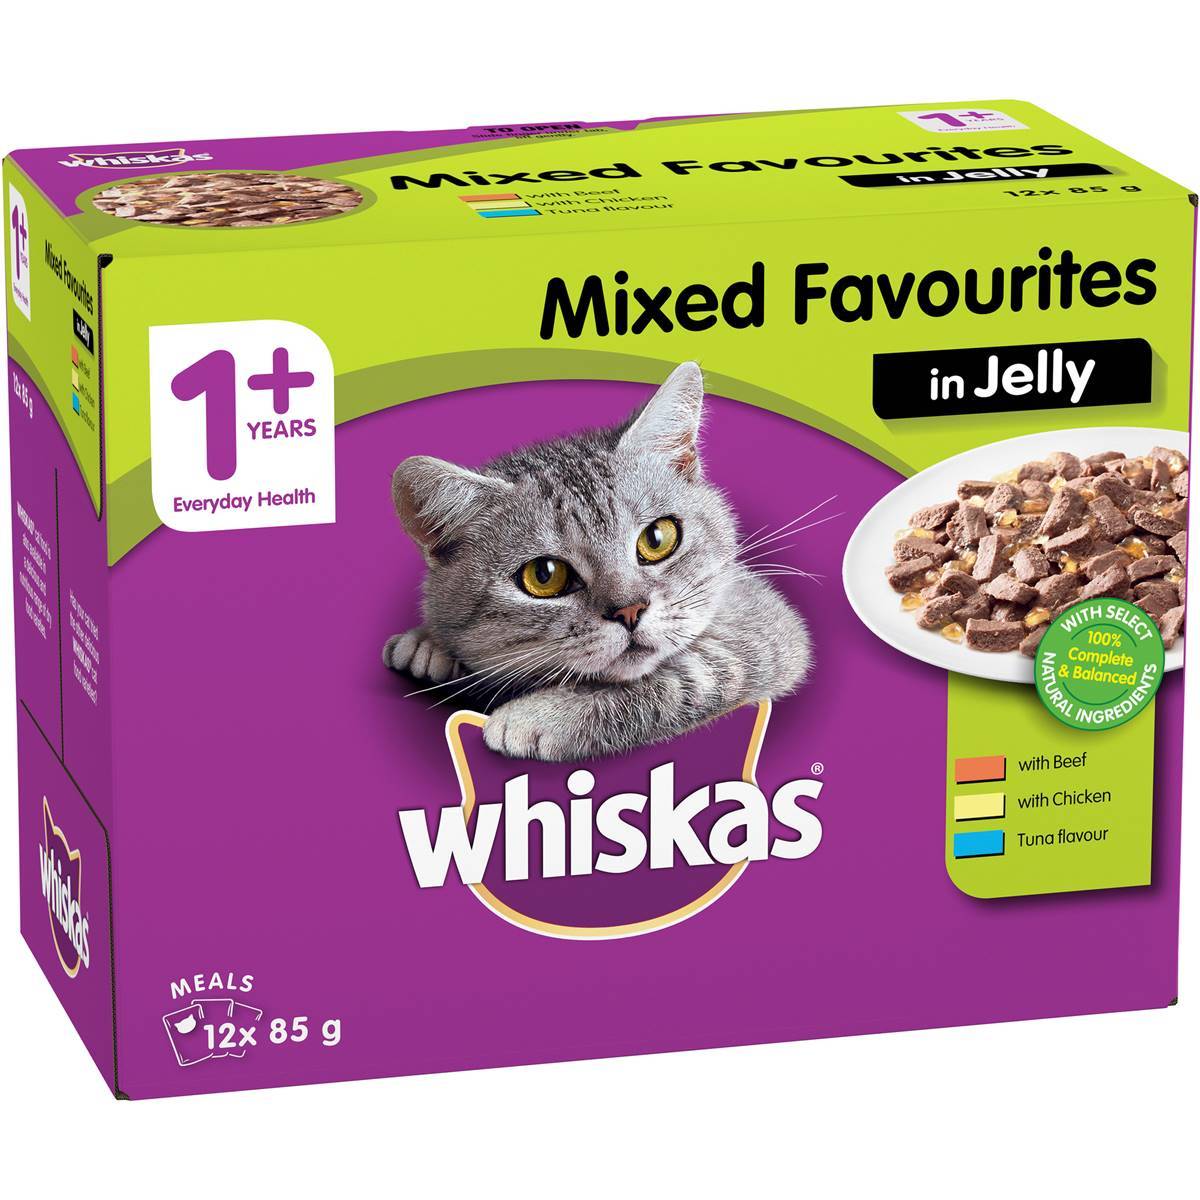 Whiskas Mixed Favourites in Jelly 12x85g